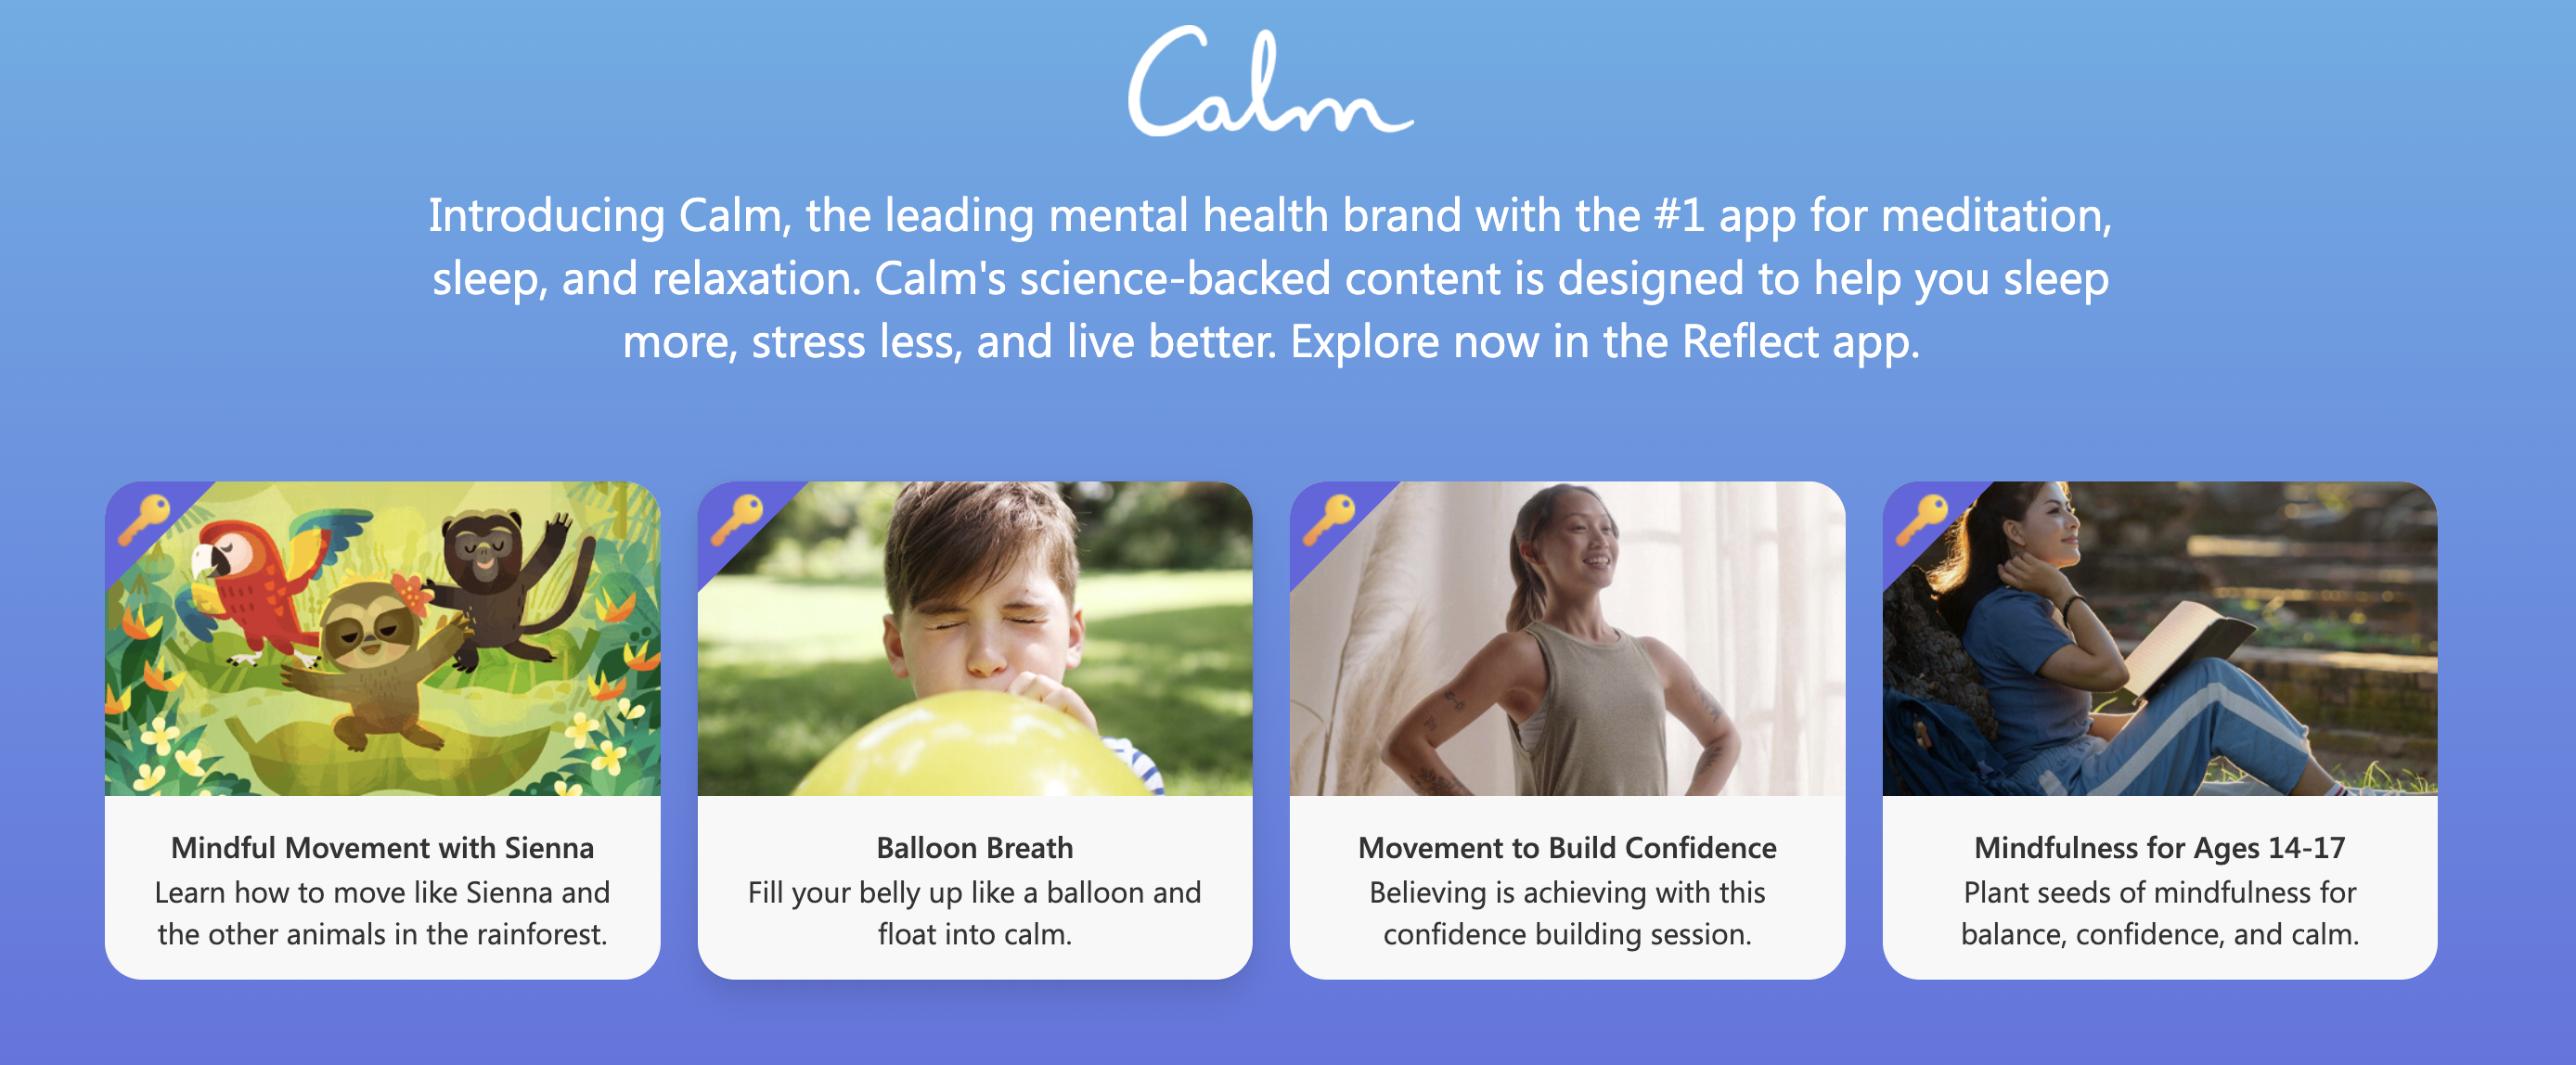 Collection of Calm activities available in Reflect, including Mindful Movement, Balloon Breath, Movement to Build Confidence, and Mindfulness for Ages 14-17.